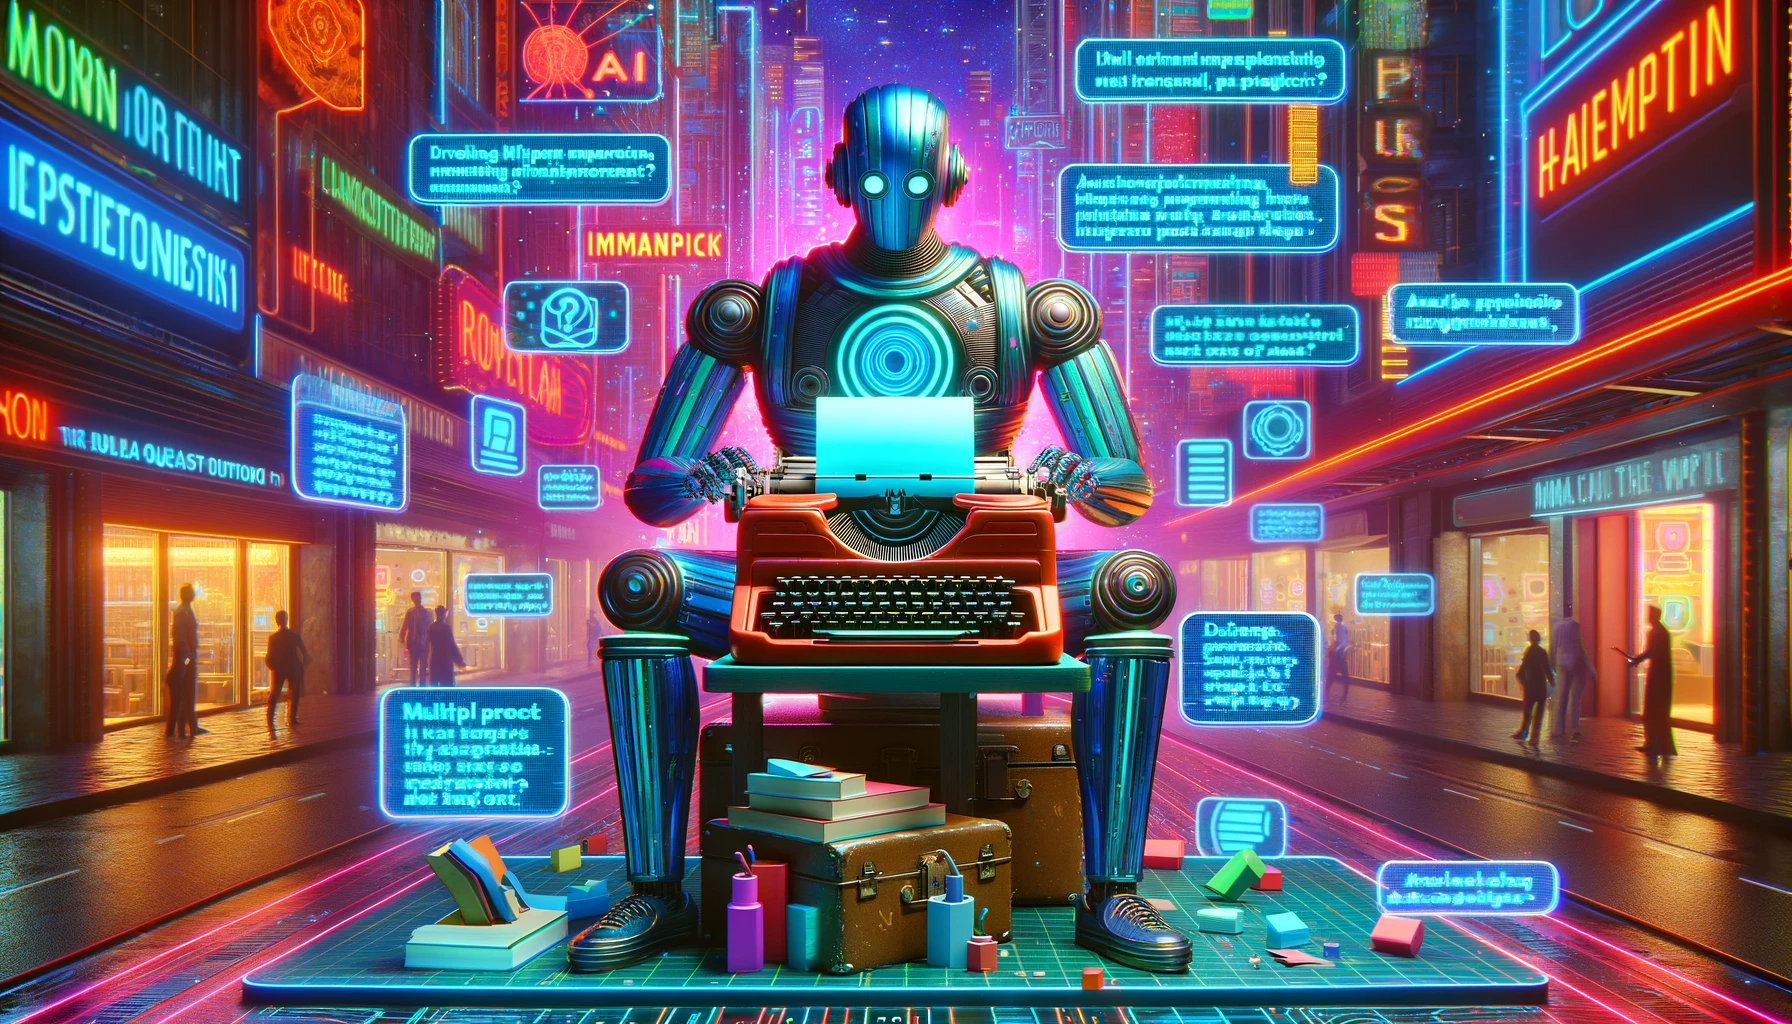 A vibrant digital artwork depicting a large, futuristic robot sitting at a vintage typewriter, surrounded by floating holographic screens displaying various question prompts. The robot is thoughtfully typing away, symbolizing the process of creating multiple imperfect prompts as described in the AMA method. The background is a bustling, neon-lit cyberpunk cityscape, representing the dynamic world of AI and technology.